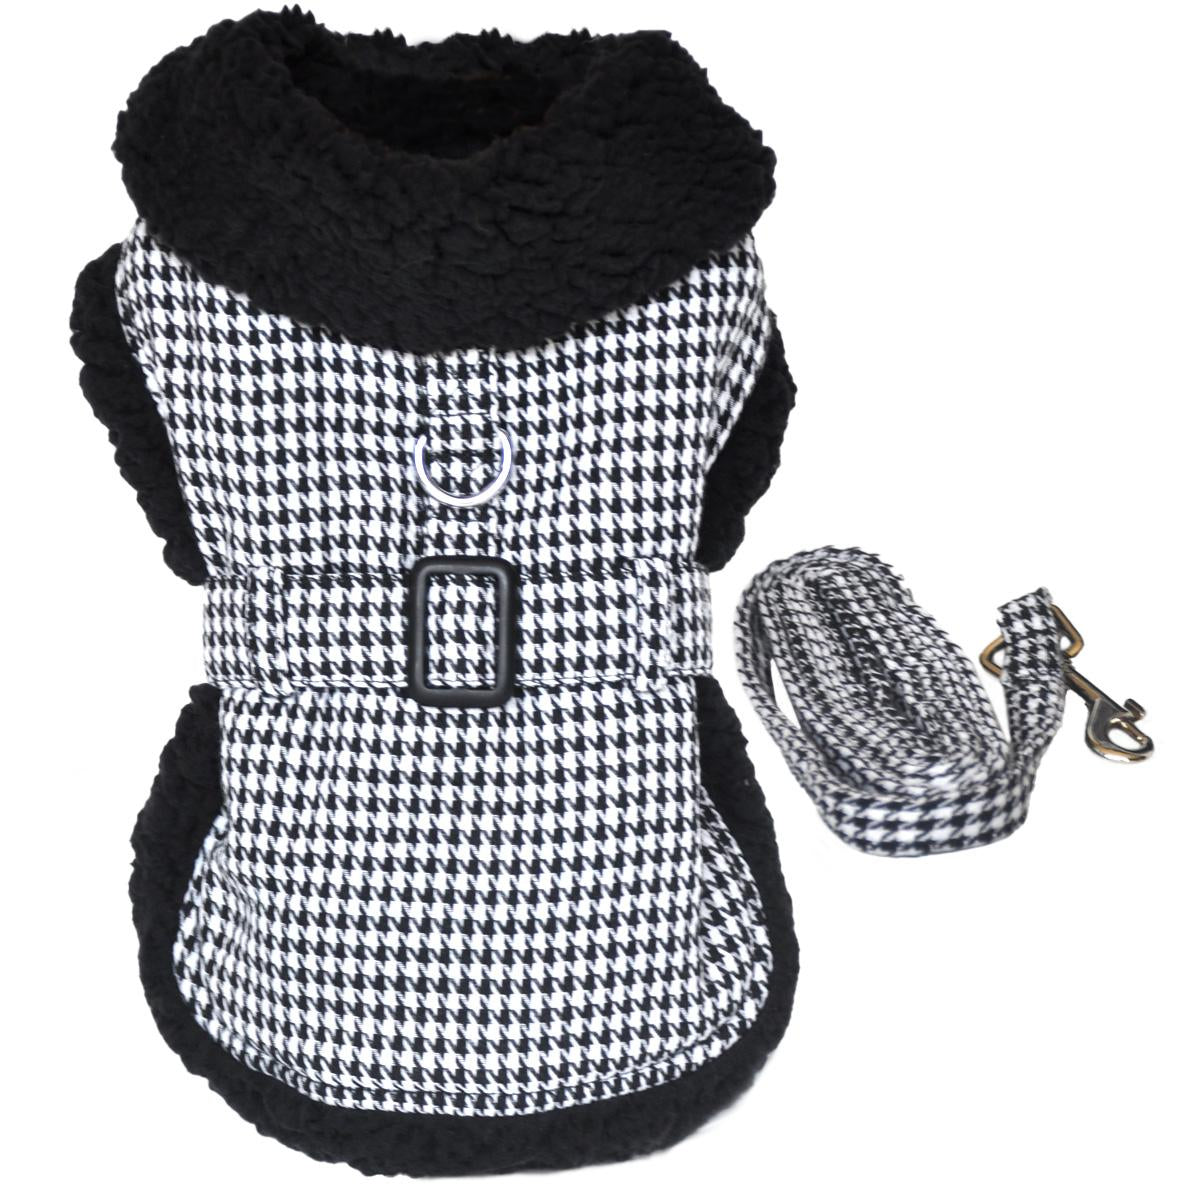 Black and White Classic Houndstooth Dog Harness Coat with Leash